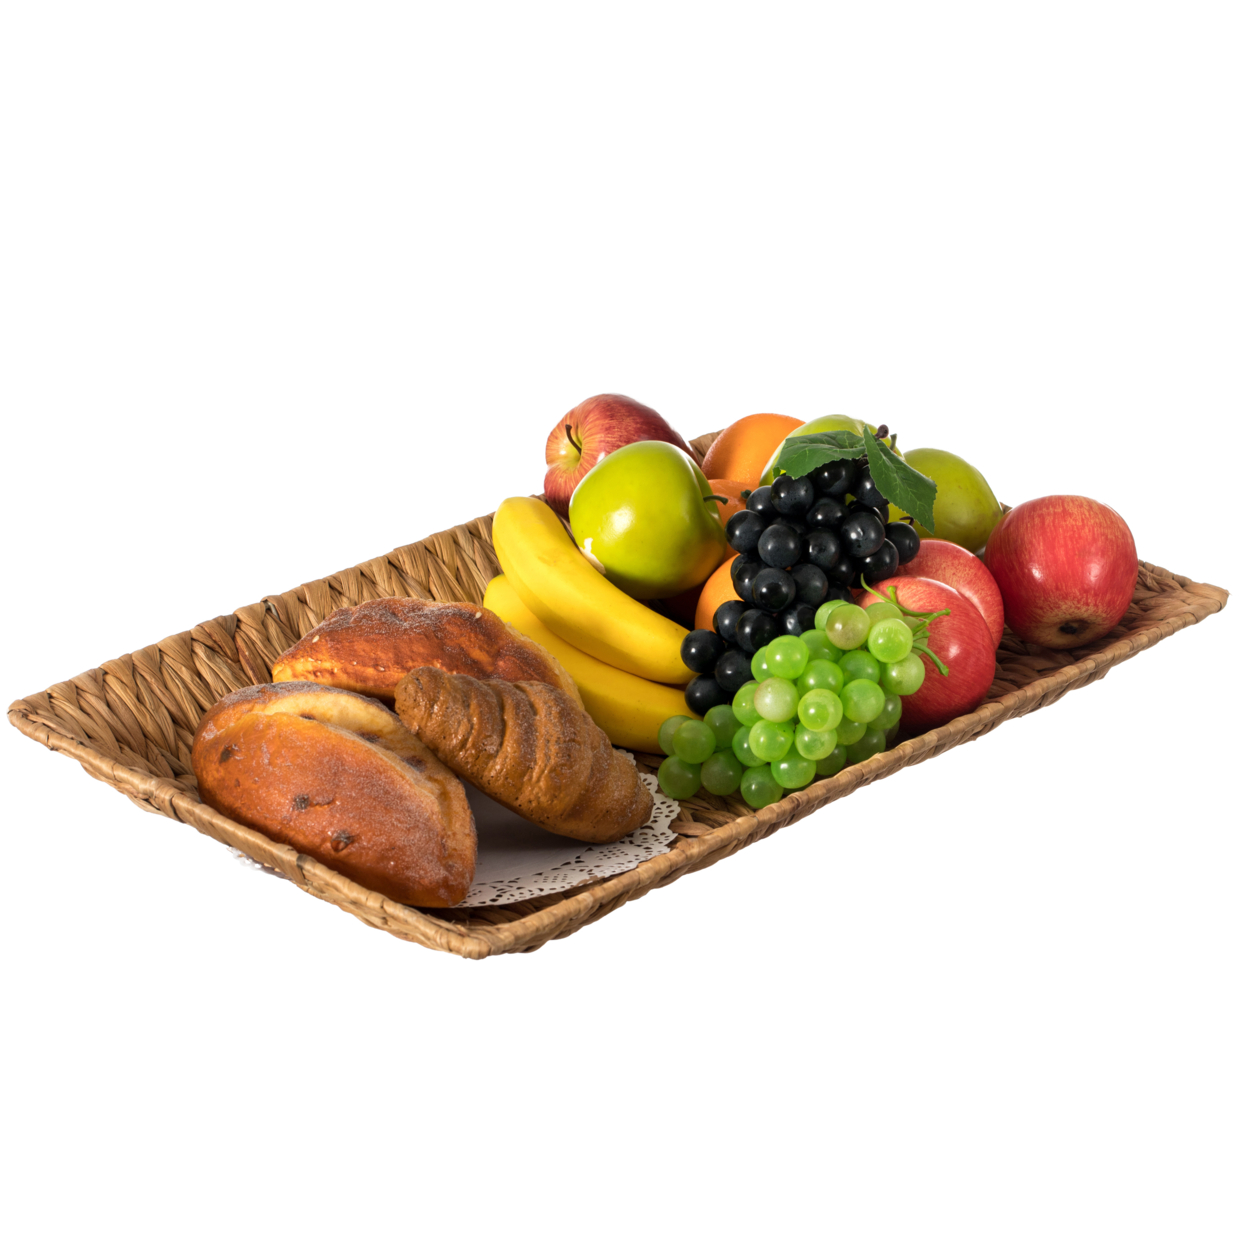 Natural Decorative Rectangular Hand-Woven Water Hyacinth Serving Tray With Built-in Handles - Set Of 3